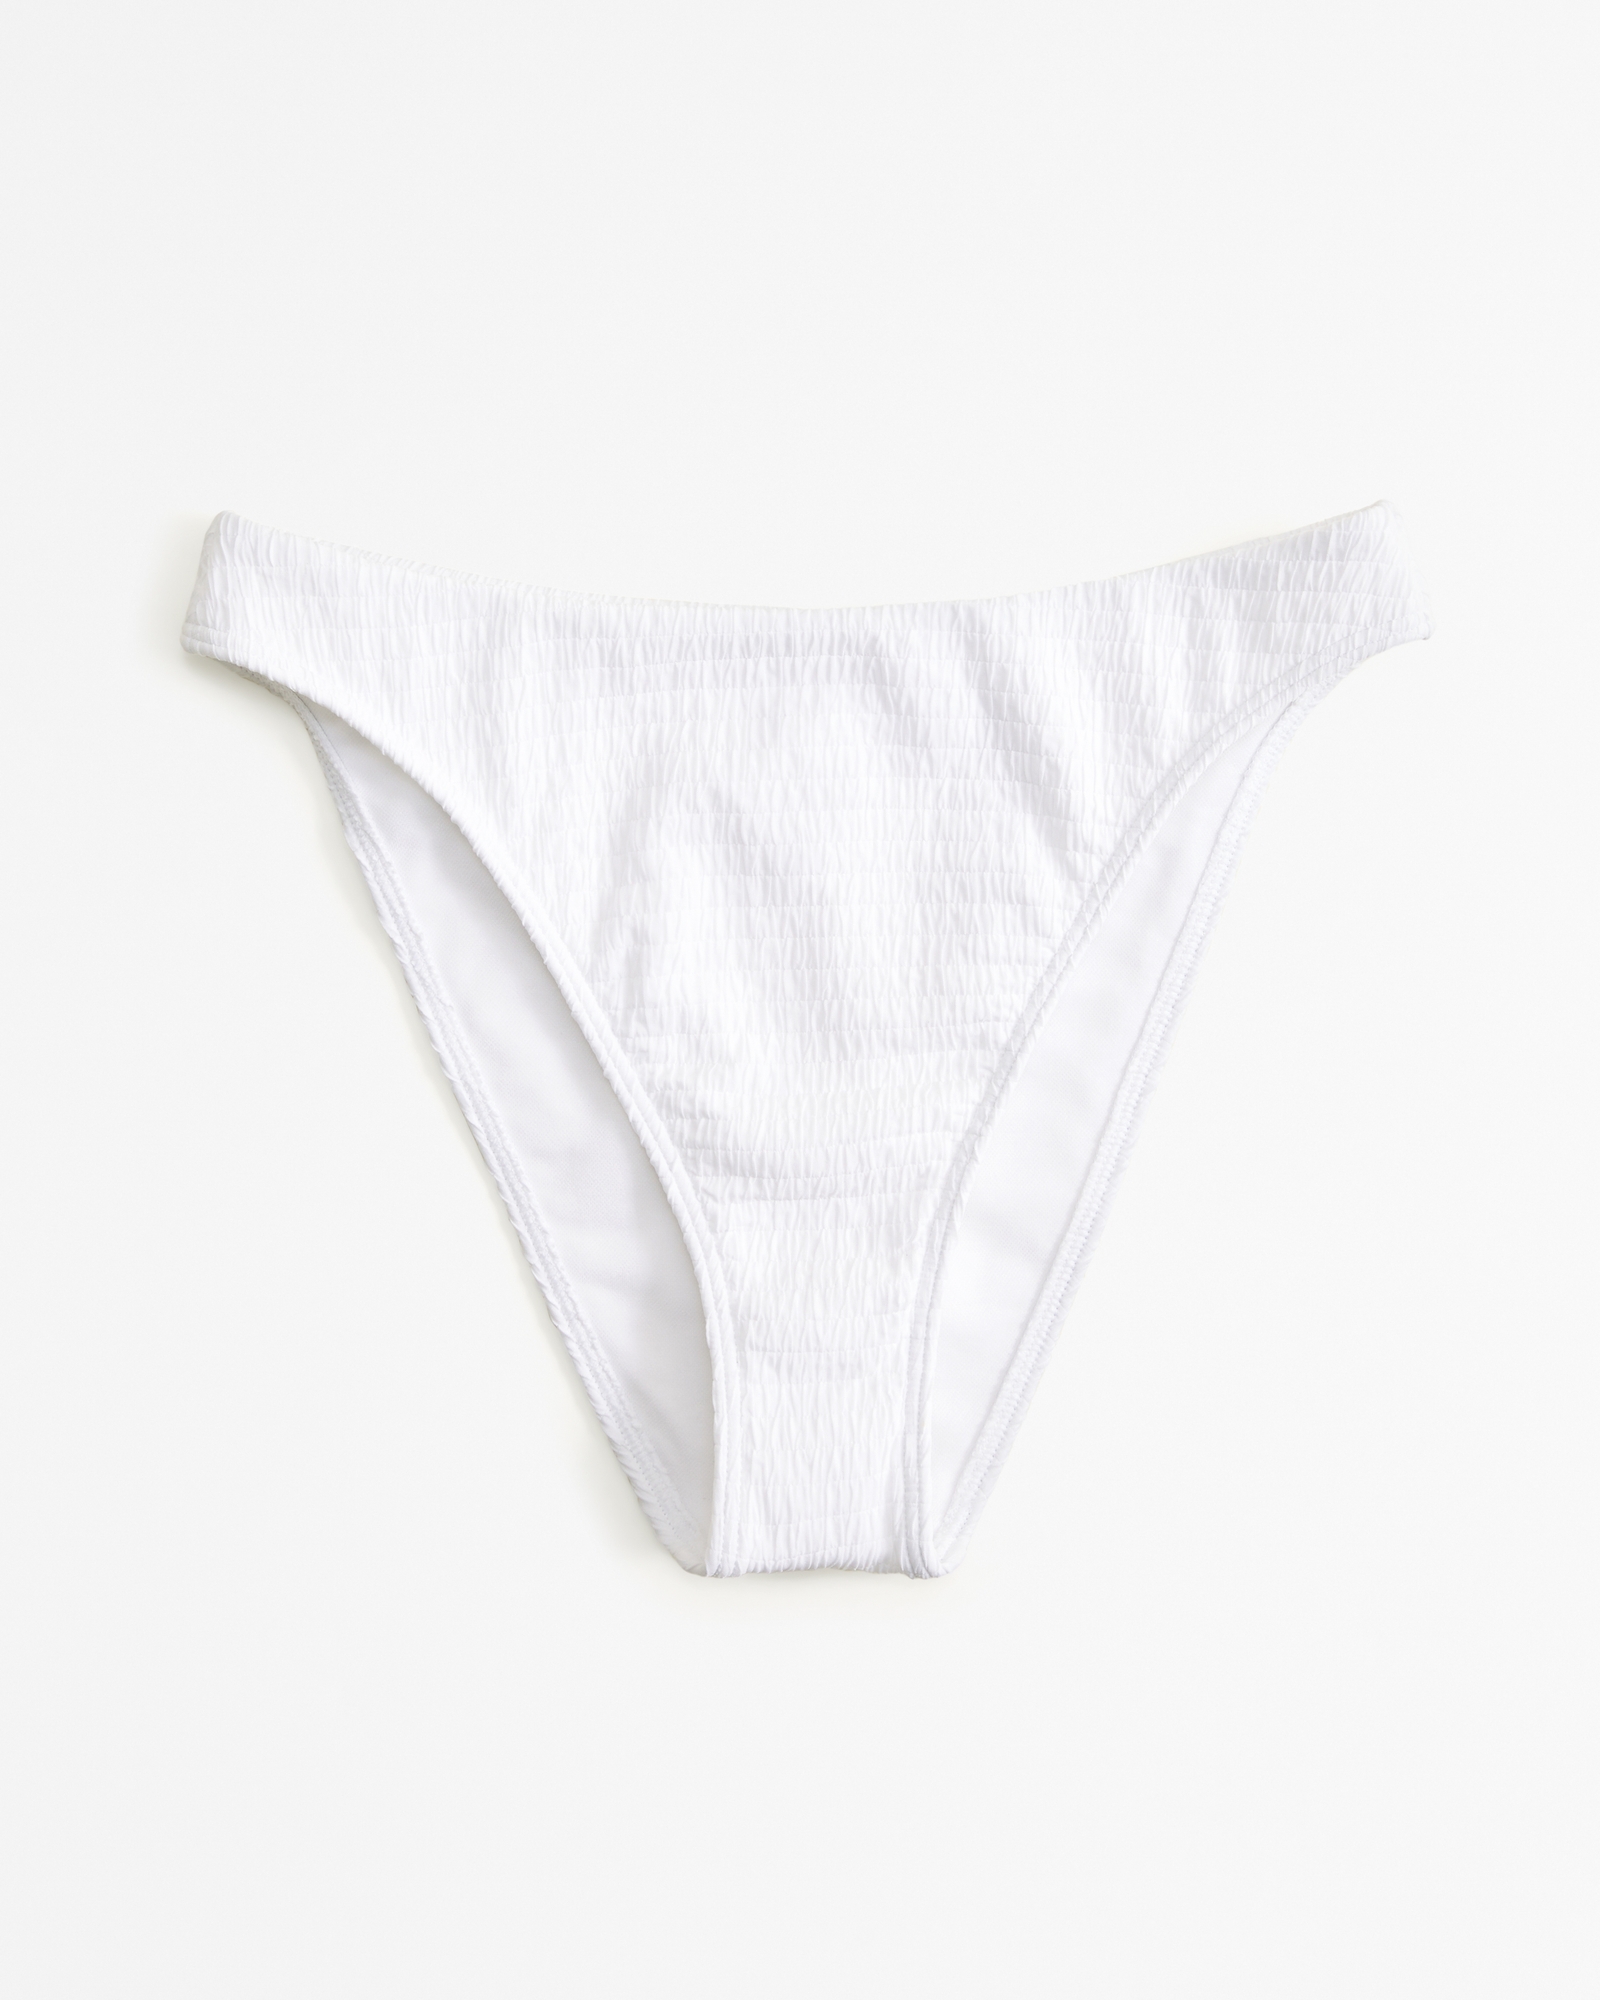 Hollister Gilly Hicks Cotton Blend Thong Underwear 7-pack in White